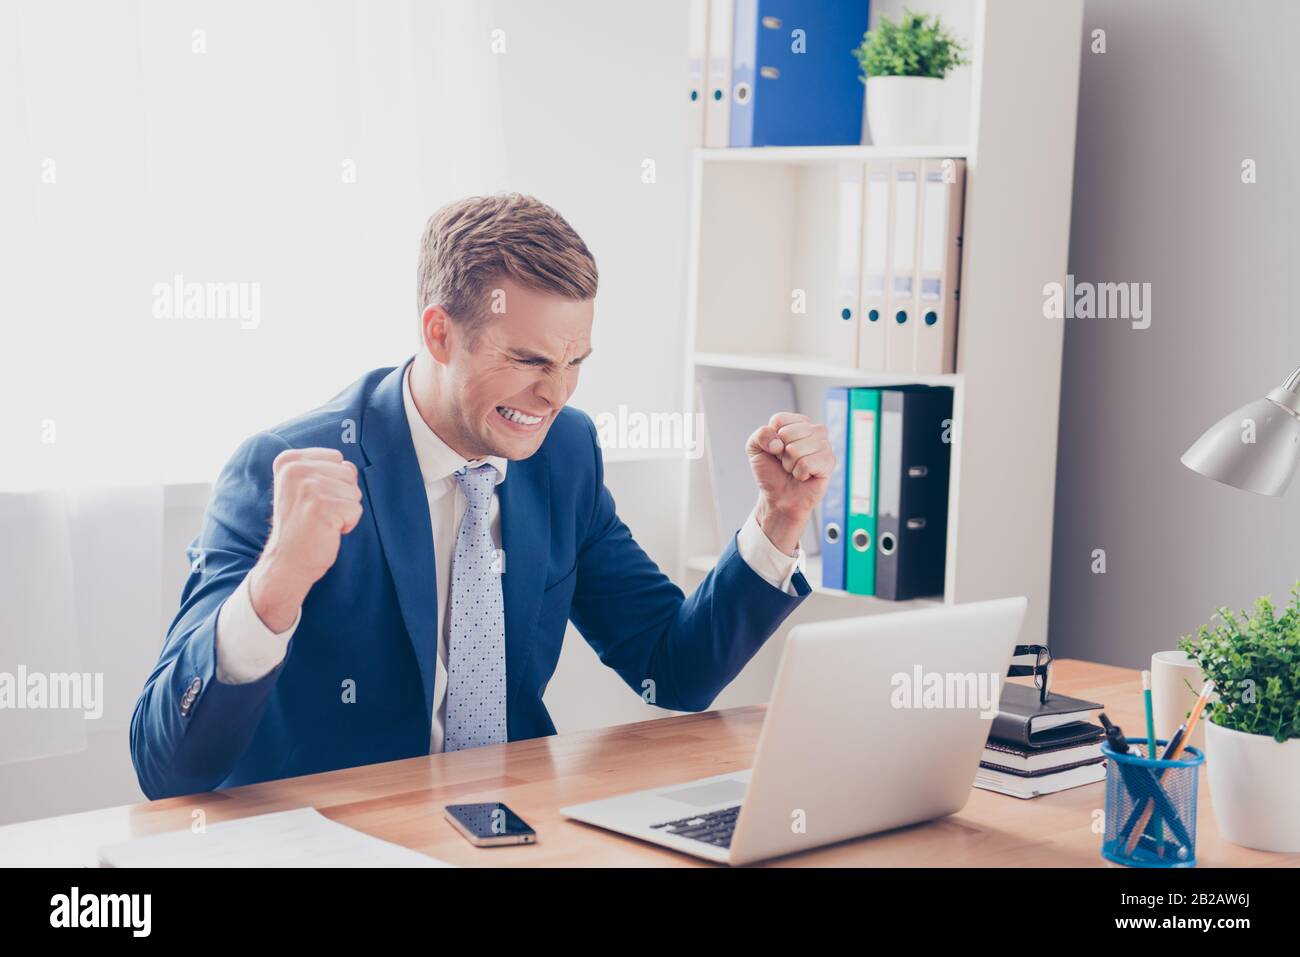 Portrait of angry businessman in bad mood showing fists Stock Photo